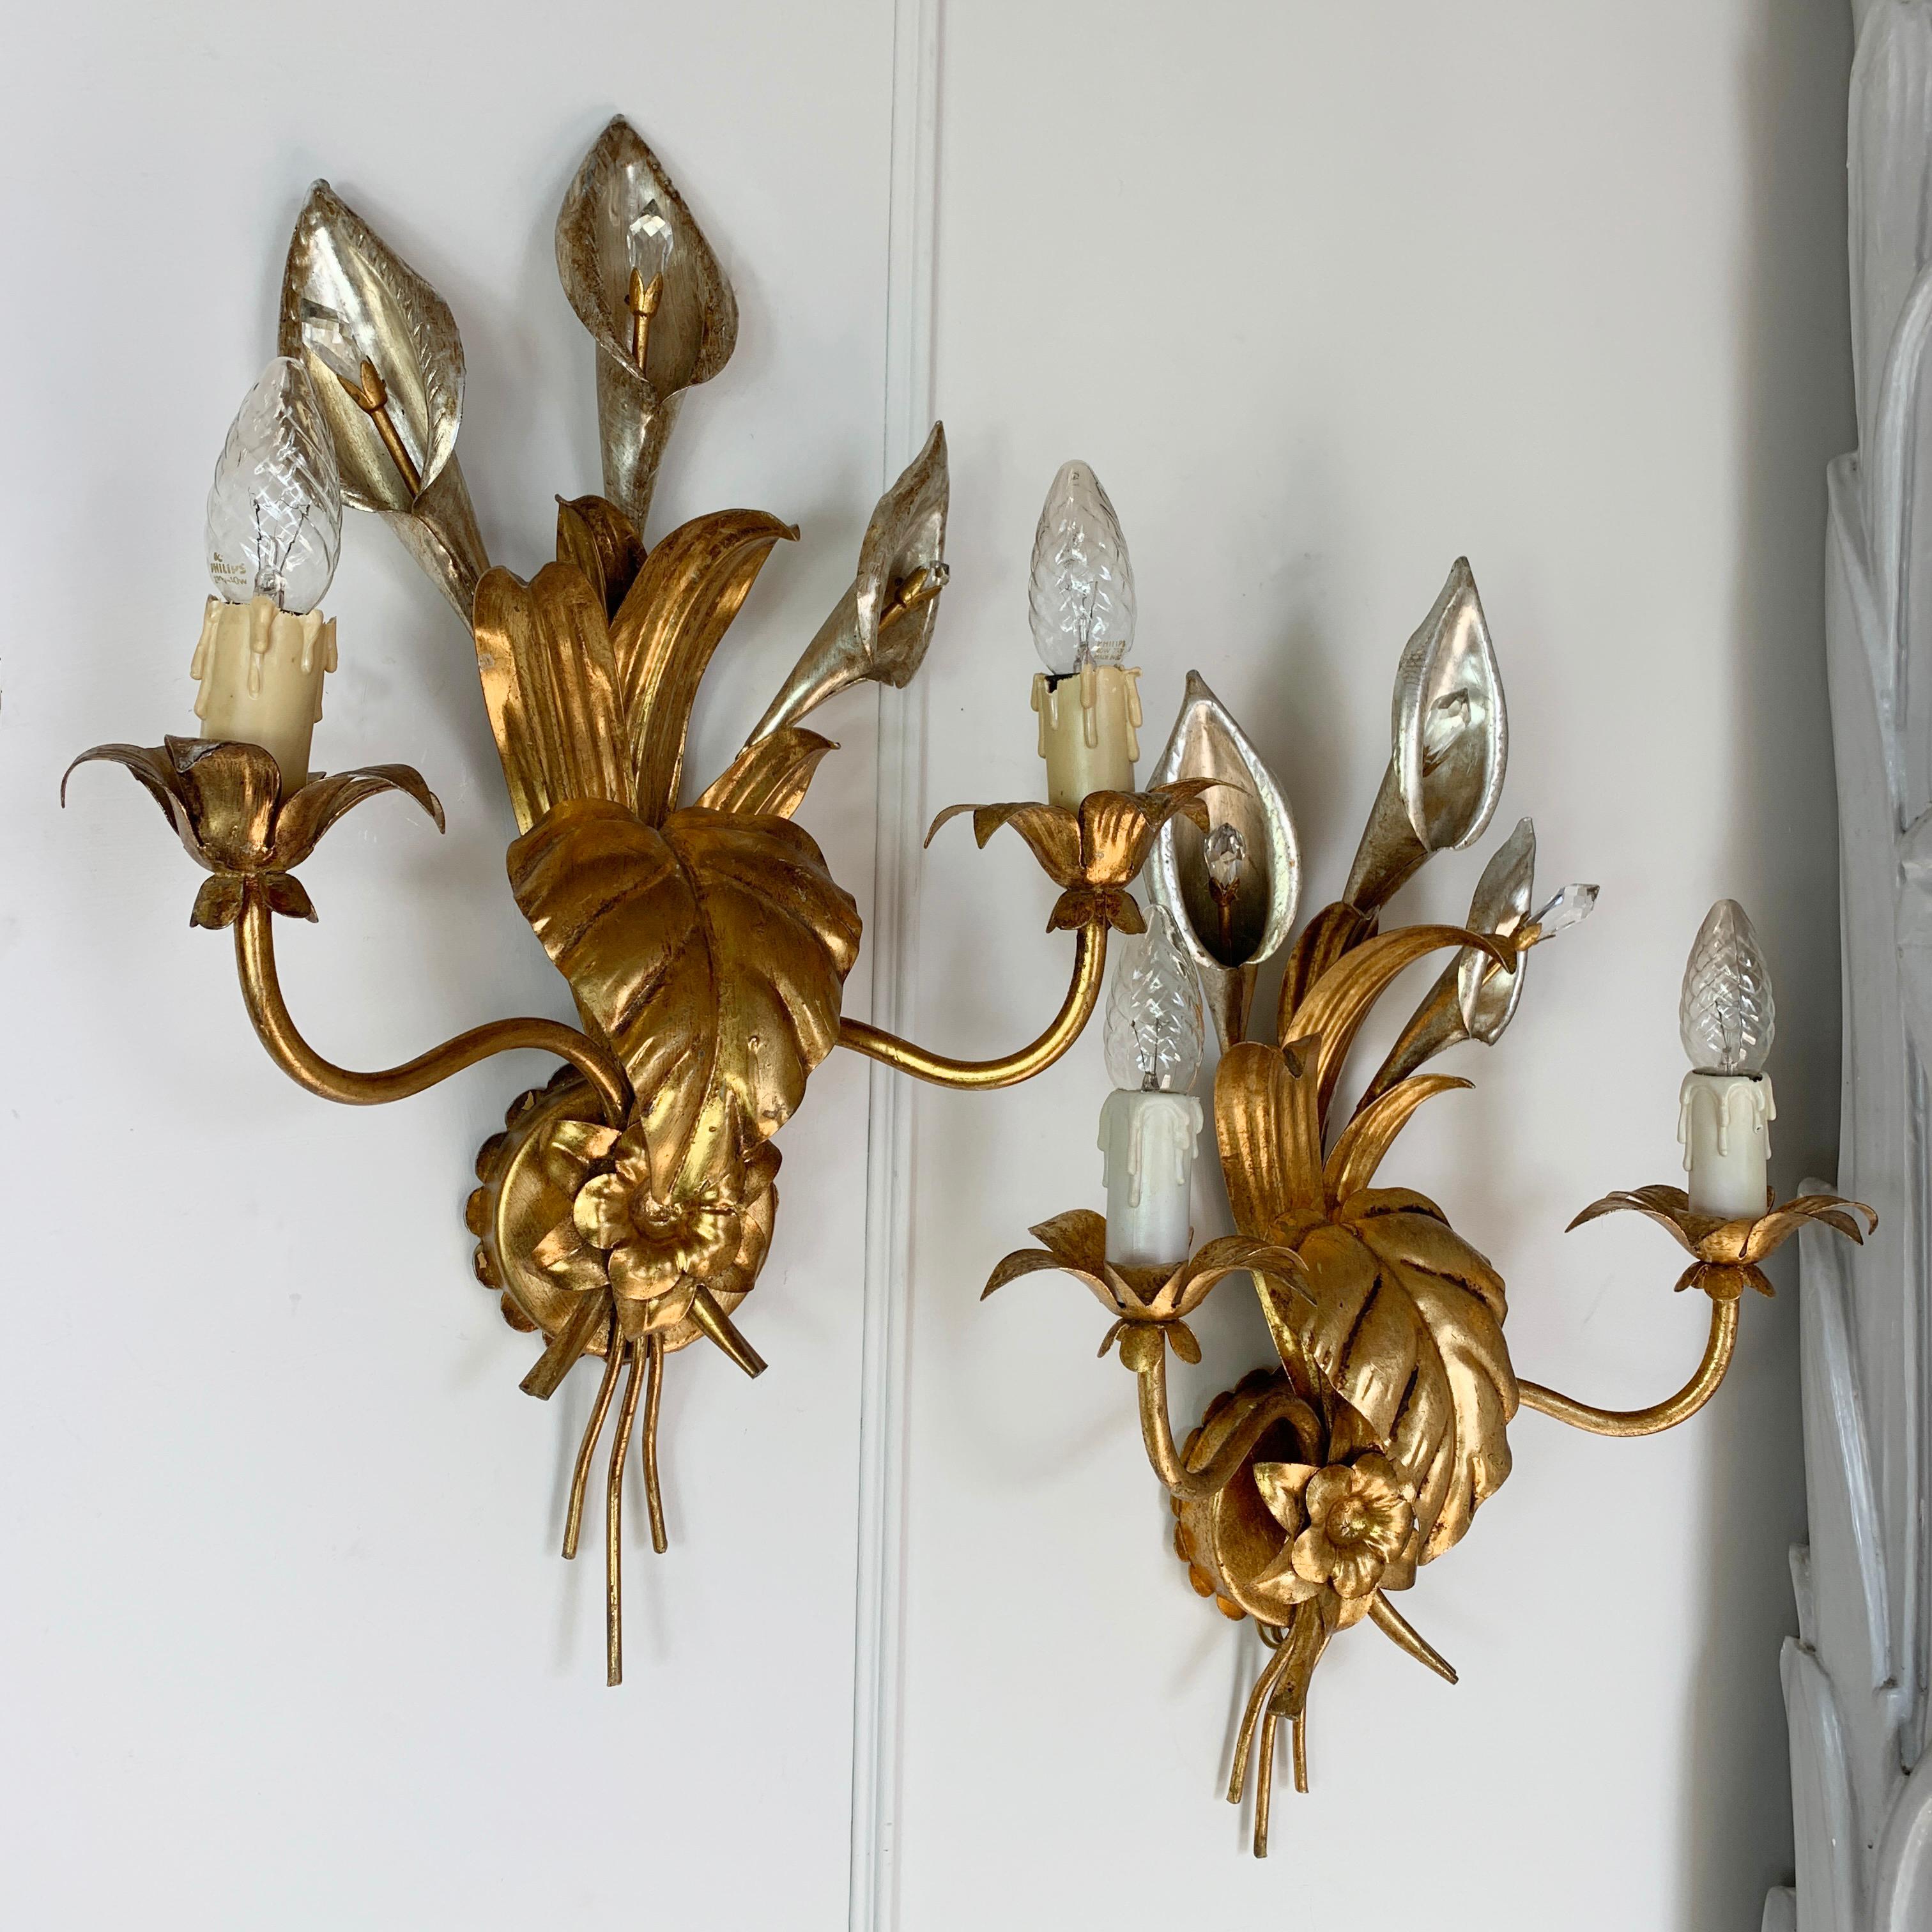 German Hans Kögl Gold and Silver Calla Lily Wall Lights, C 1970’s For Sale